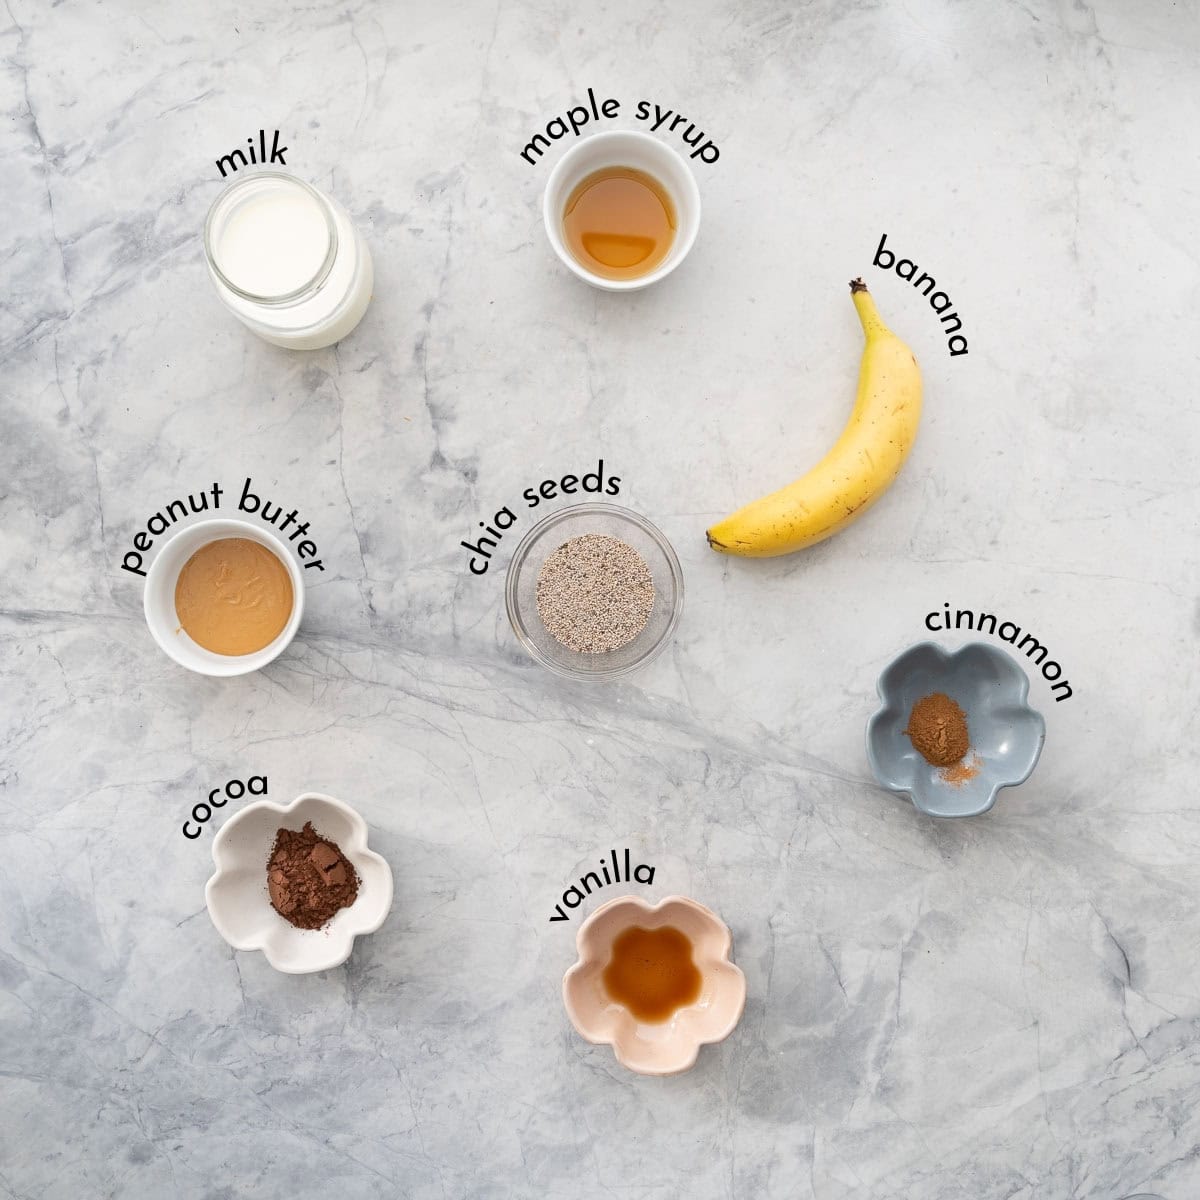 Small bowls and jugs of ingredients: milk maple syrup banana, chia seeds, vanilla, cinnamon and peanut butter. 